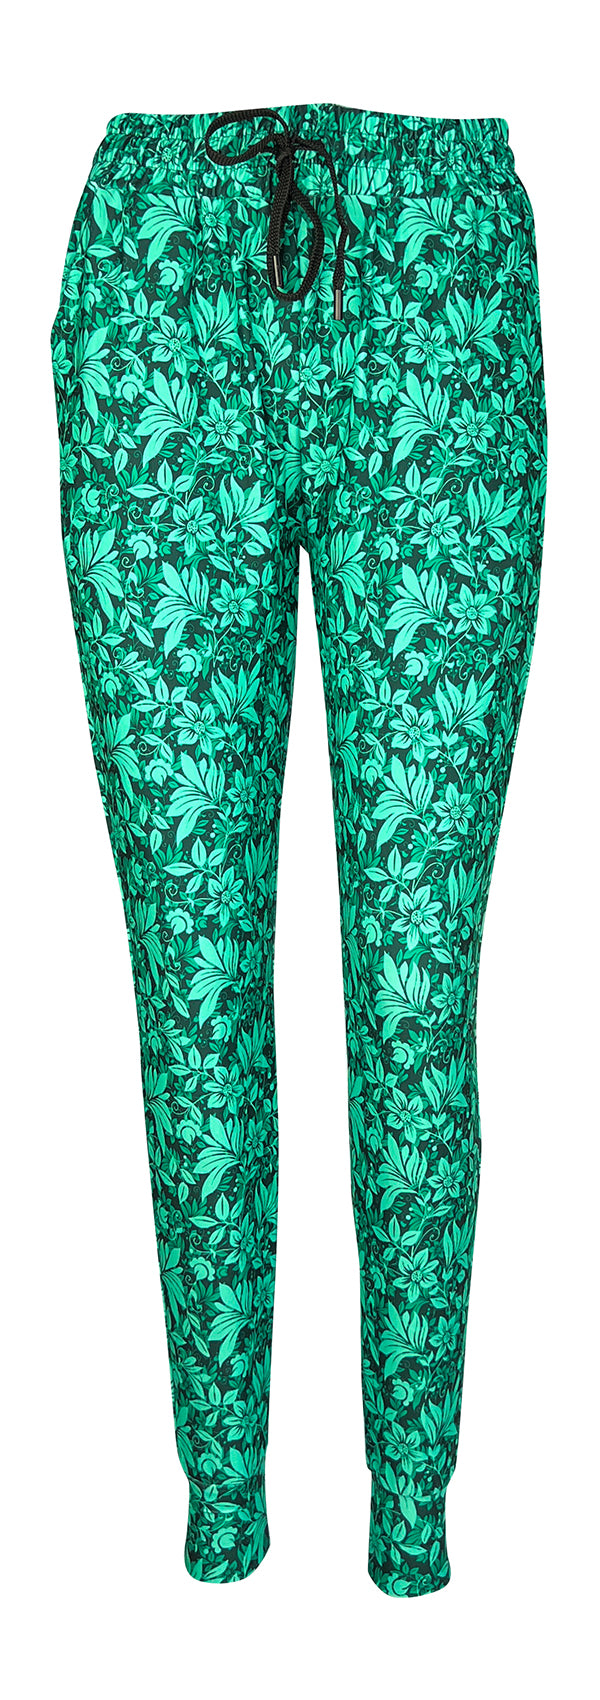 Emerald Forest Lejoggers-Joggers